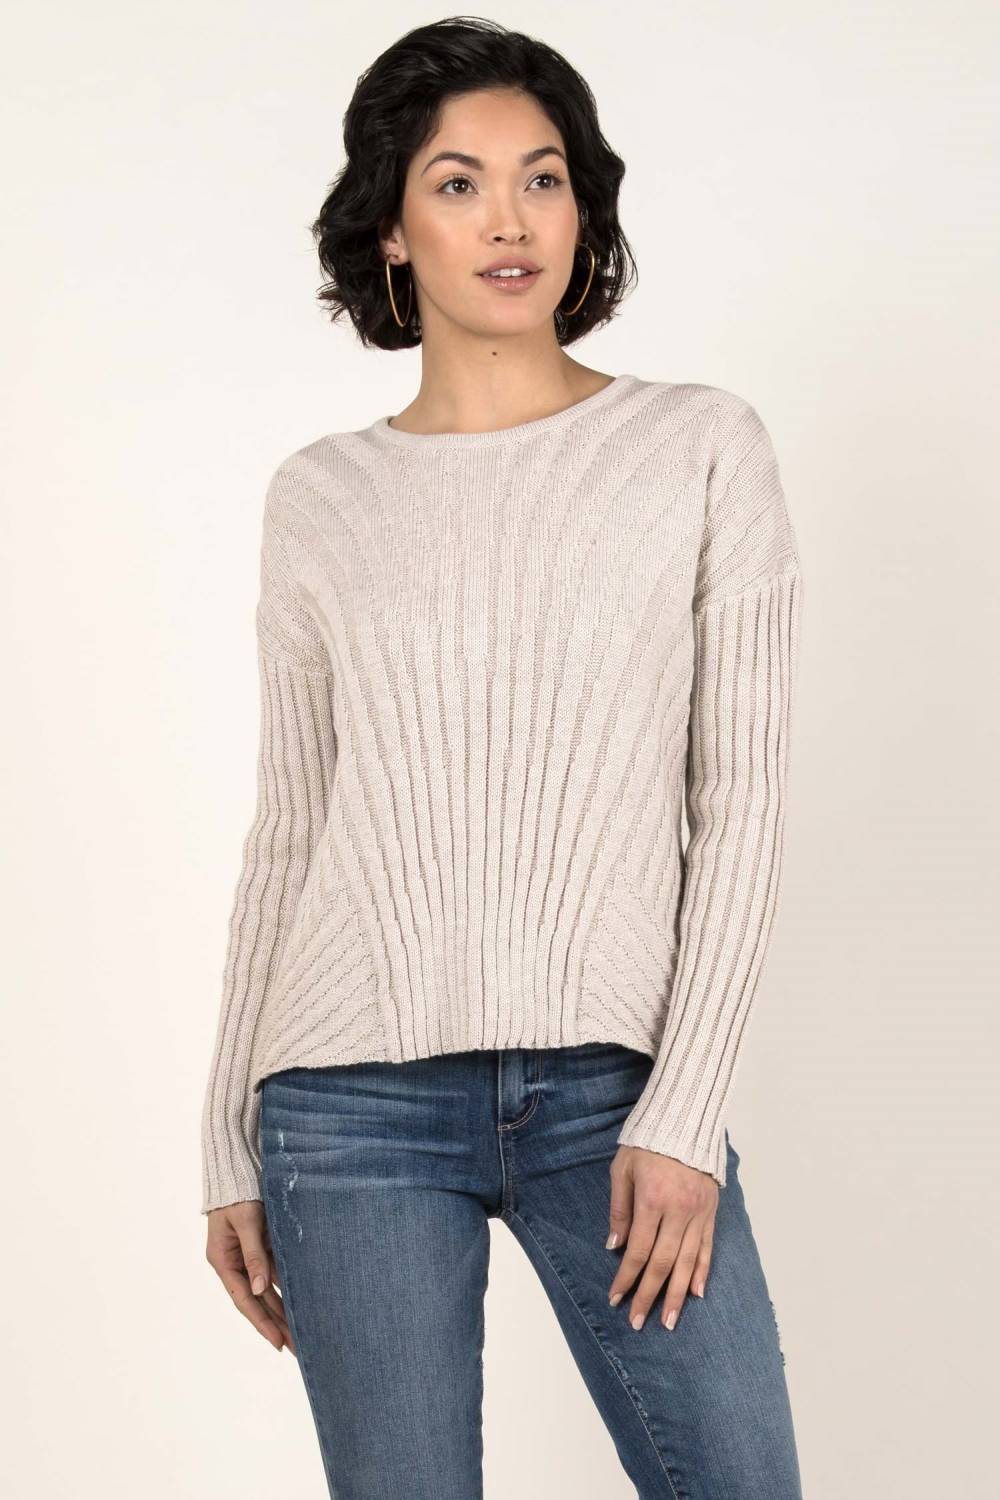 20 Best Cheap And Cute Winter Jumpers For Women | Panaprium